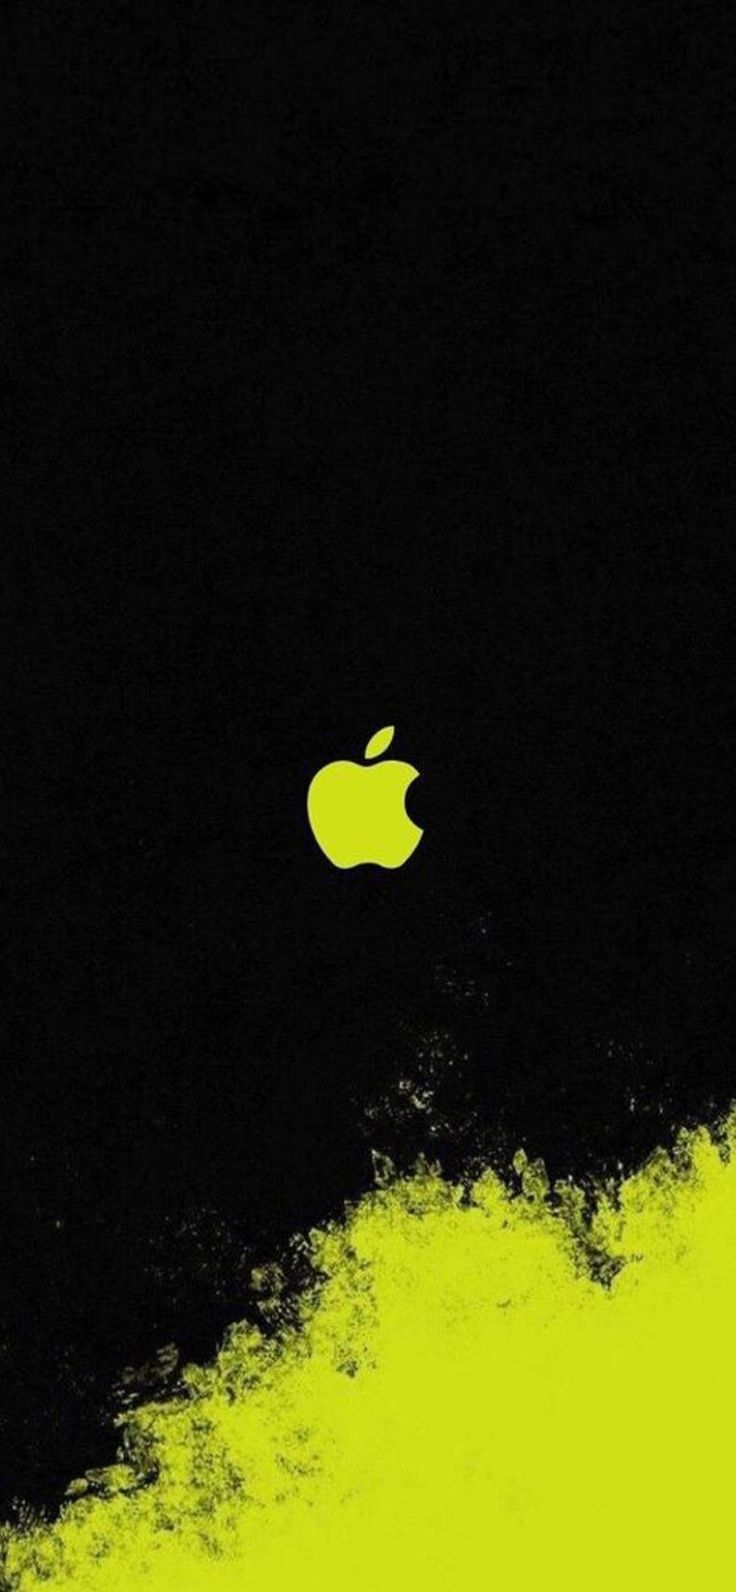 Alternative Wallpaper for Apple iPhone 11 and Yellow Art Apple Logo Wallpaper. Wallpaper Download. High Resolution Wallpaper. Apple logo wallpaper iphone, Apple logo wallpaper, iPhone wallpaper hipster